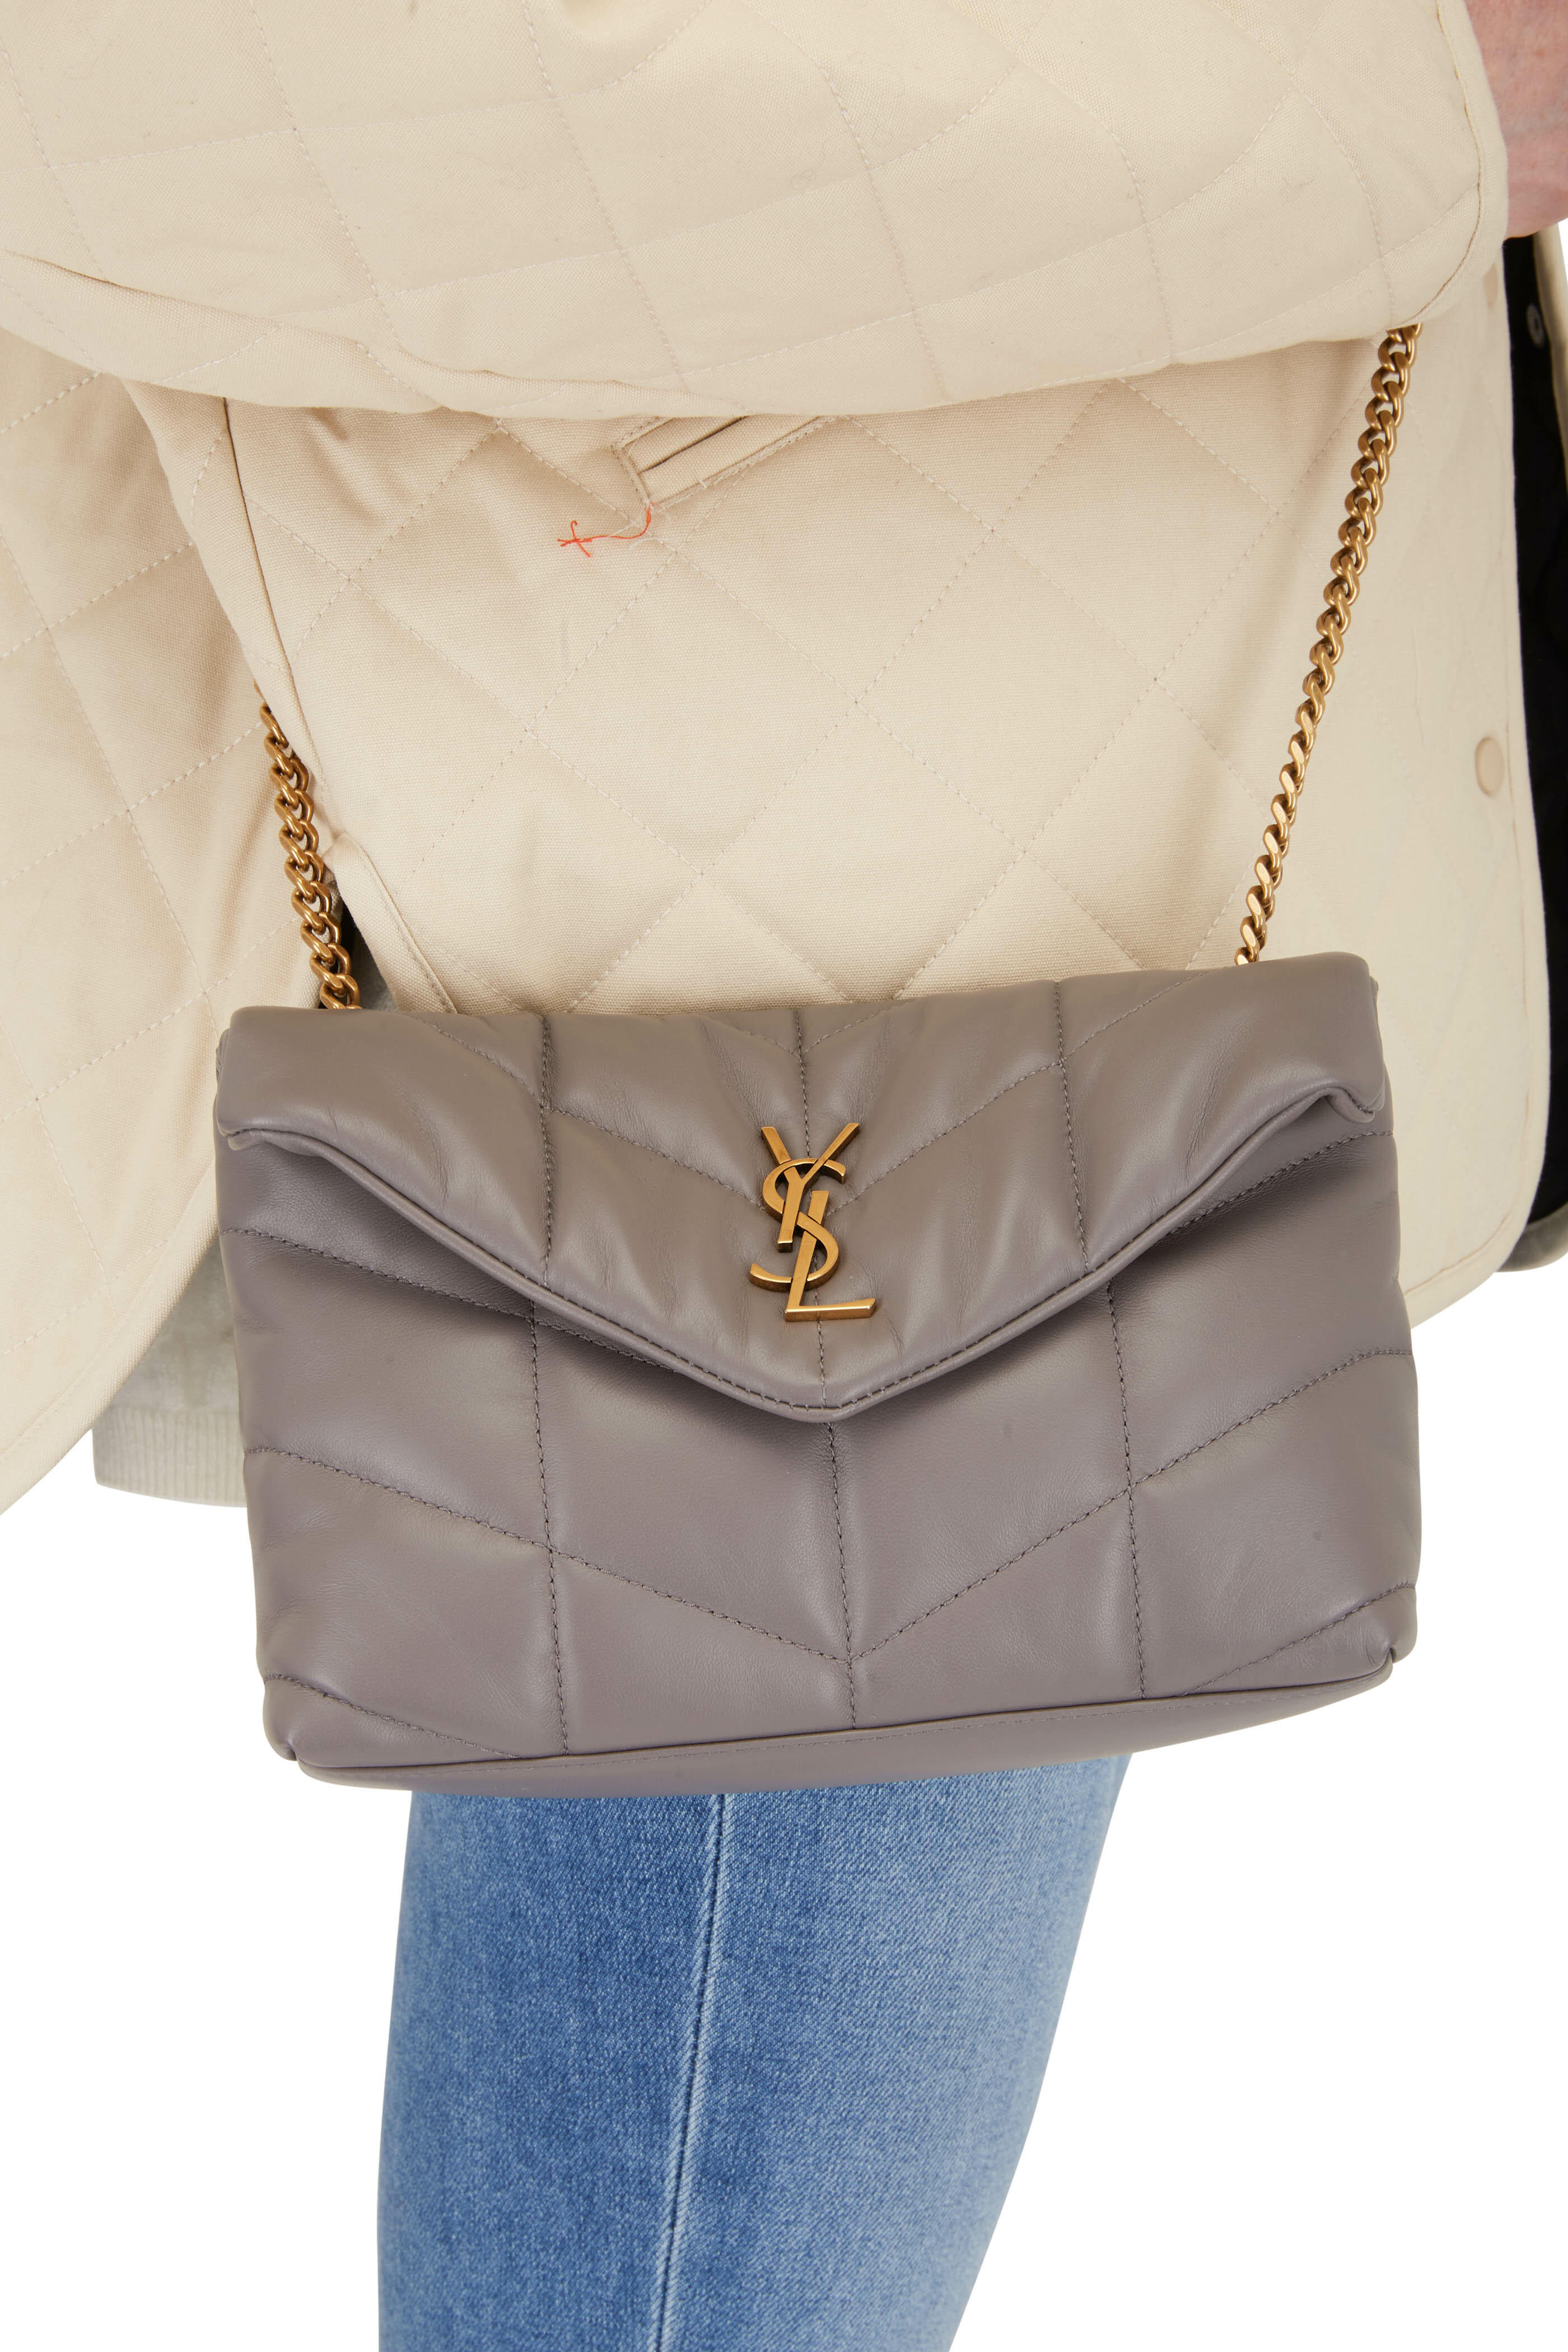 YSL Toy Puffer Complete Review! Details, Pros & Cons, What Fits